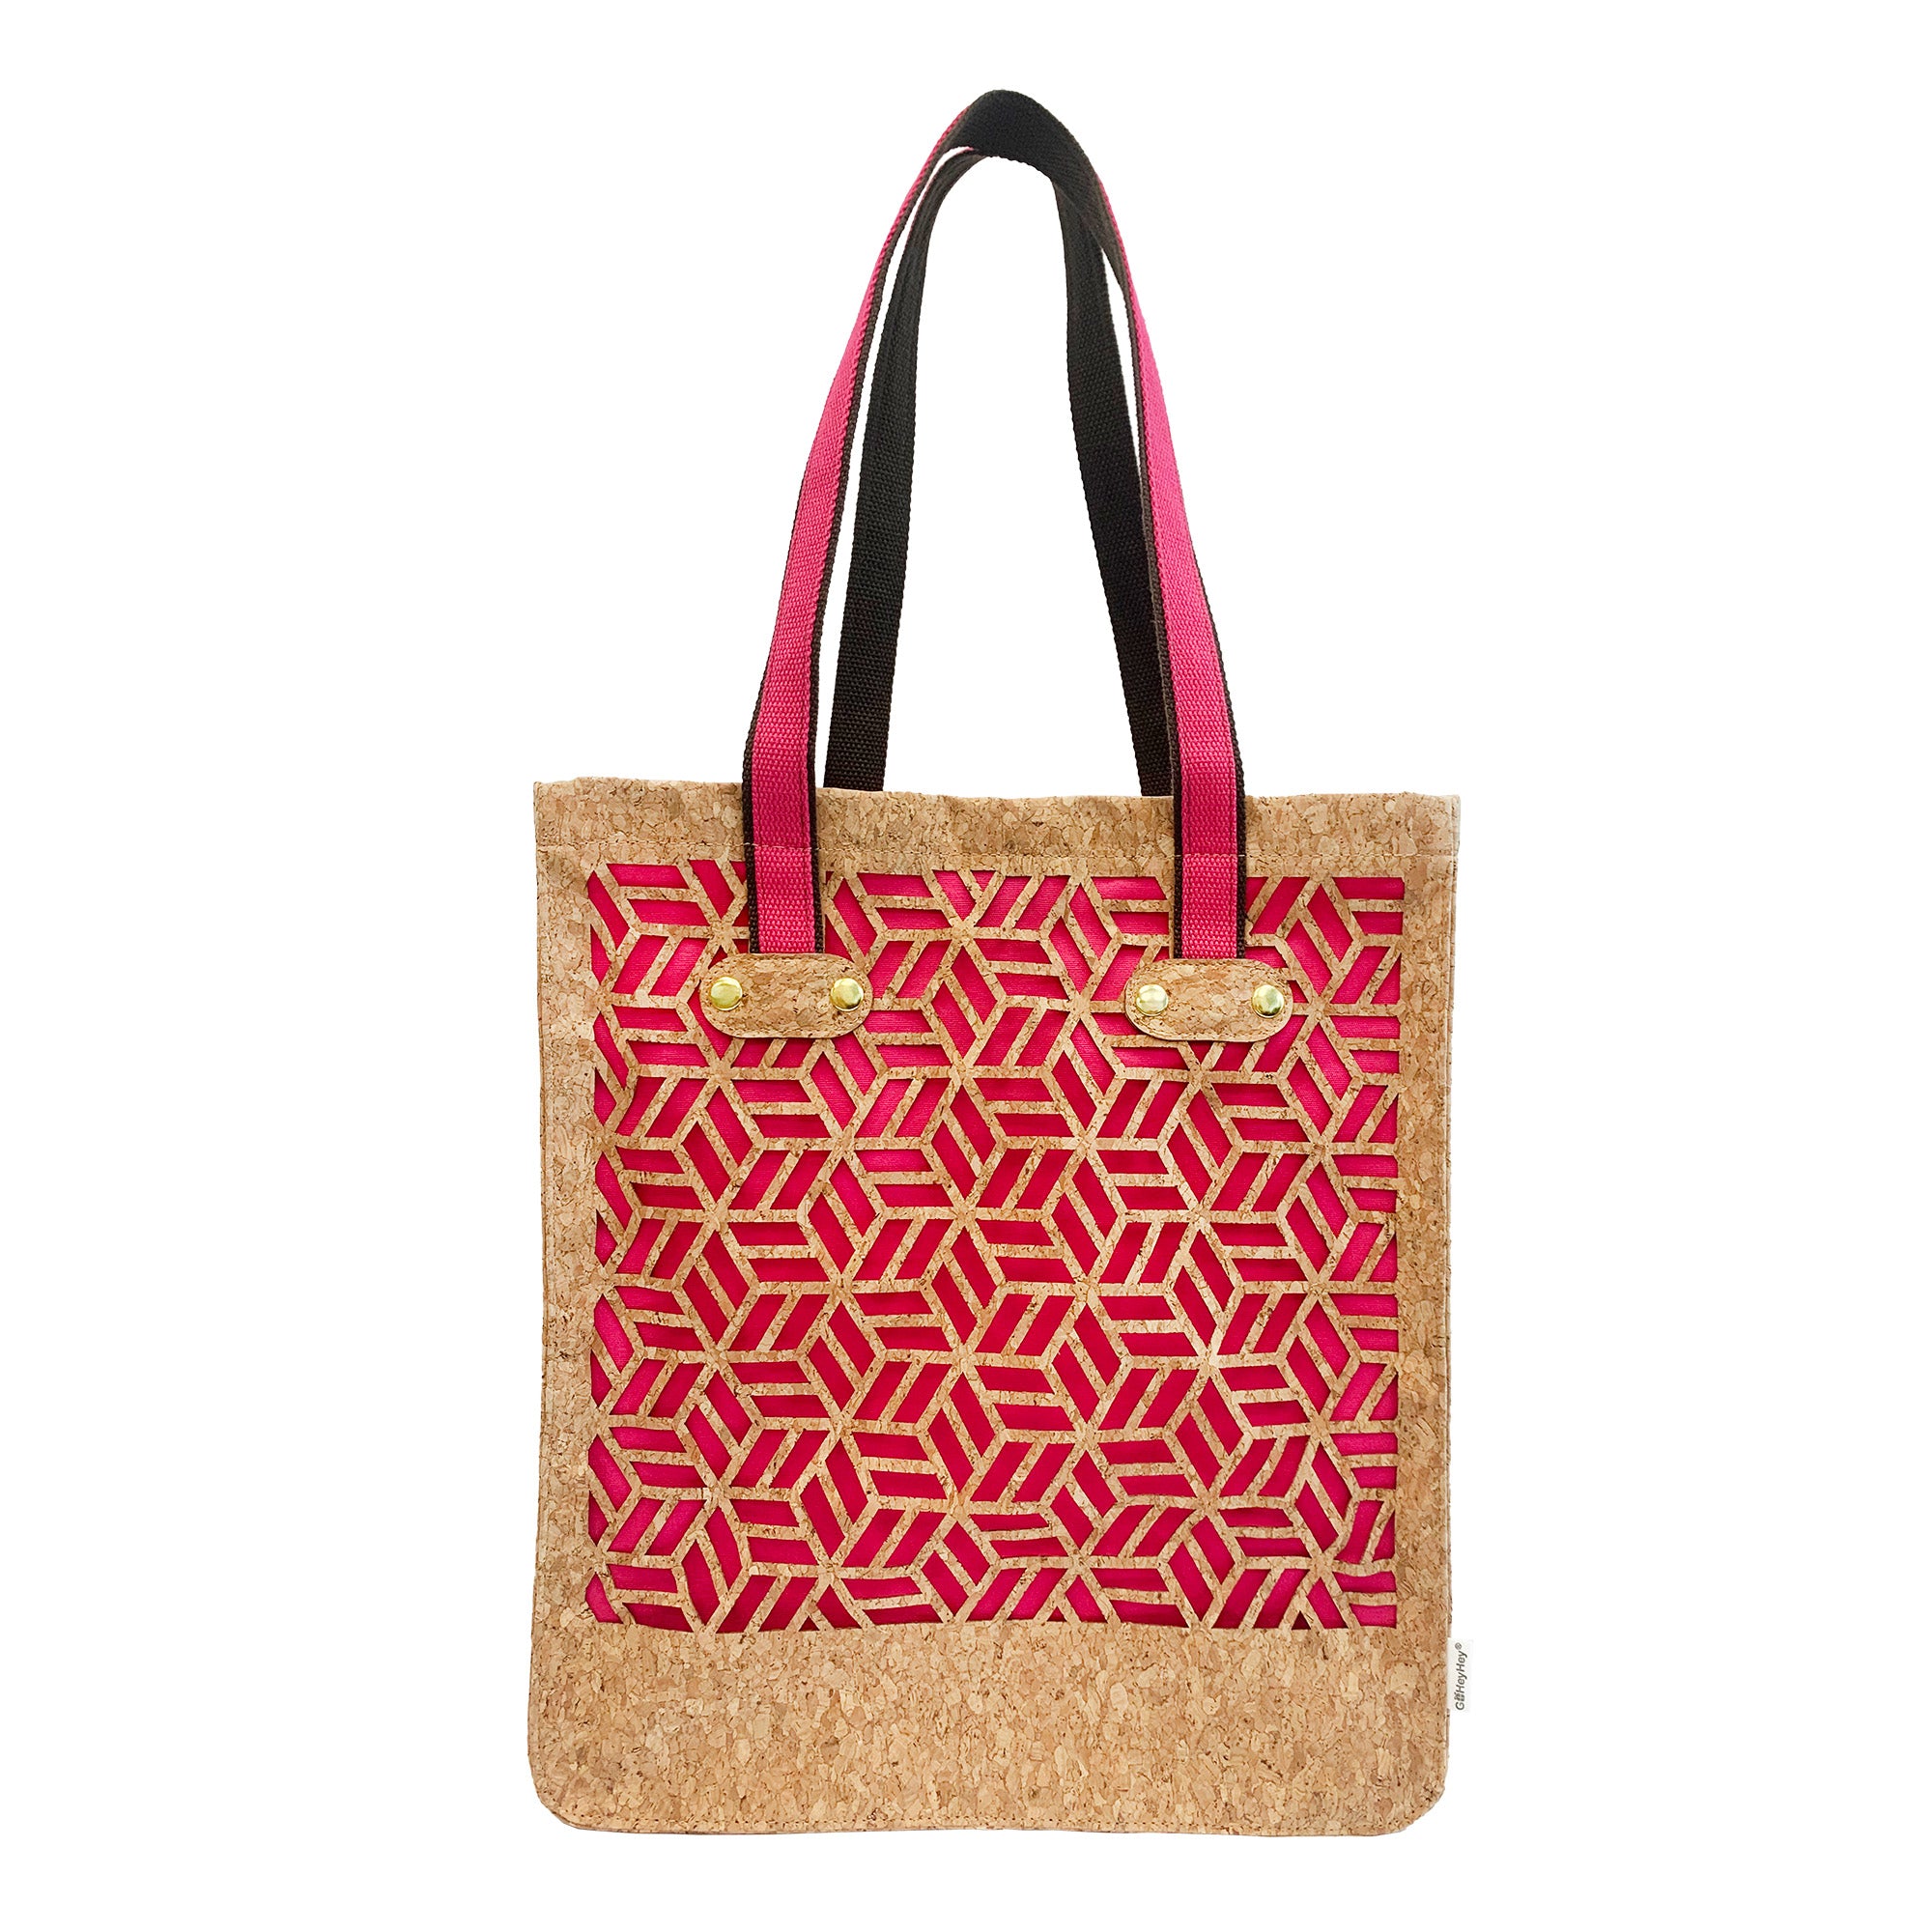 Polygonal Cork Fabric Tote Bag-sustainable tote bags-tote bag for women-leather tote bags for women